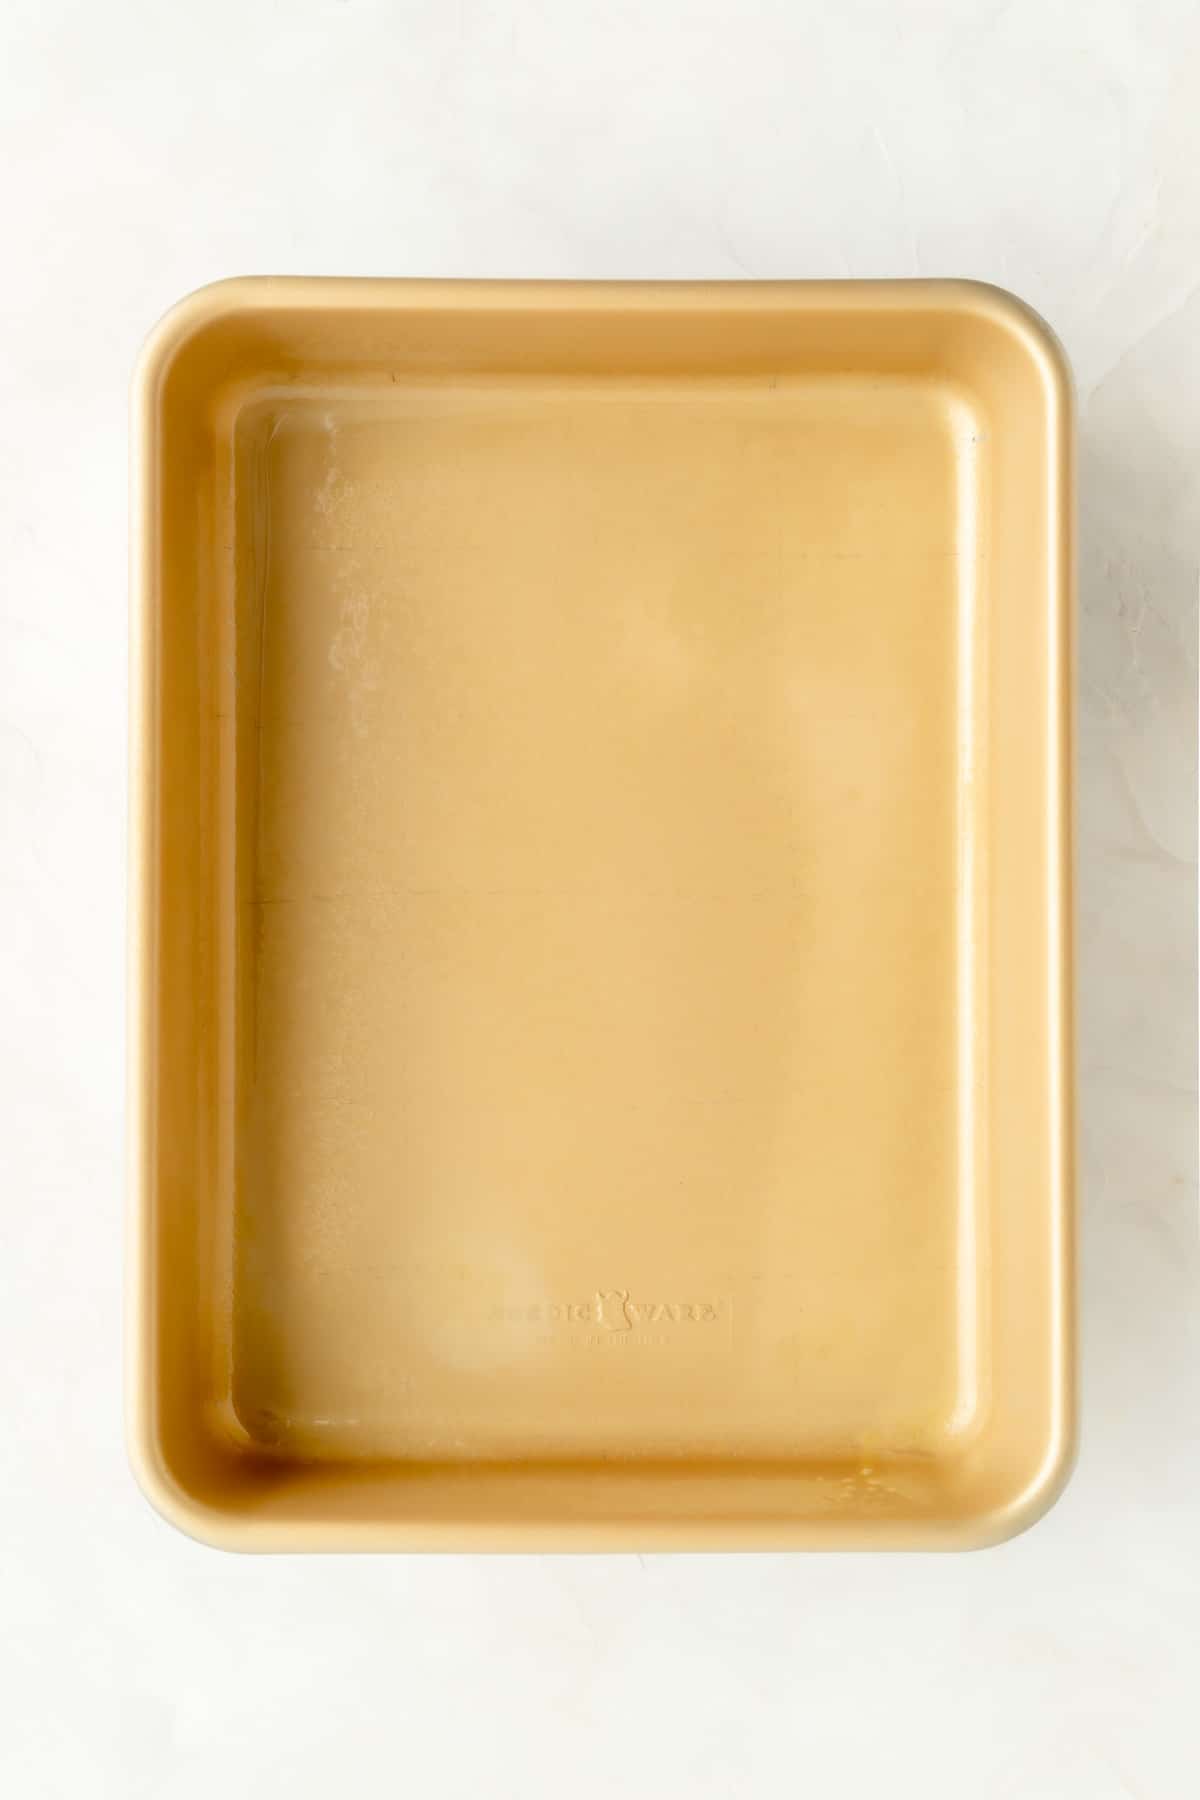 Greased gold 9 x 13 pan on a white background.